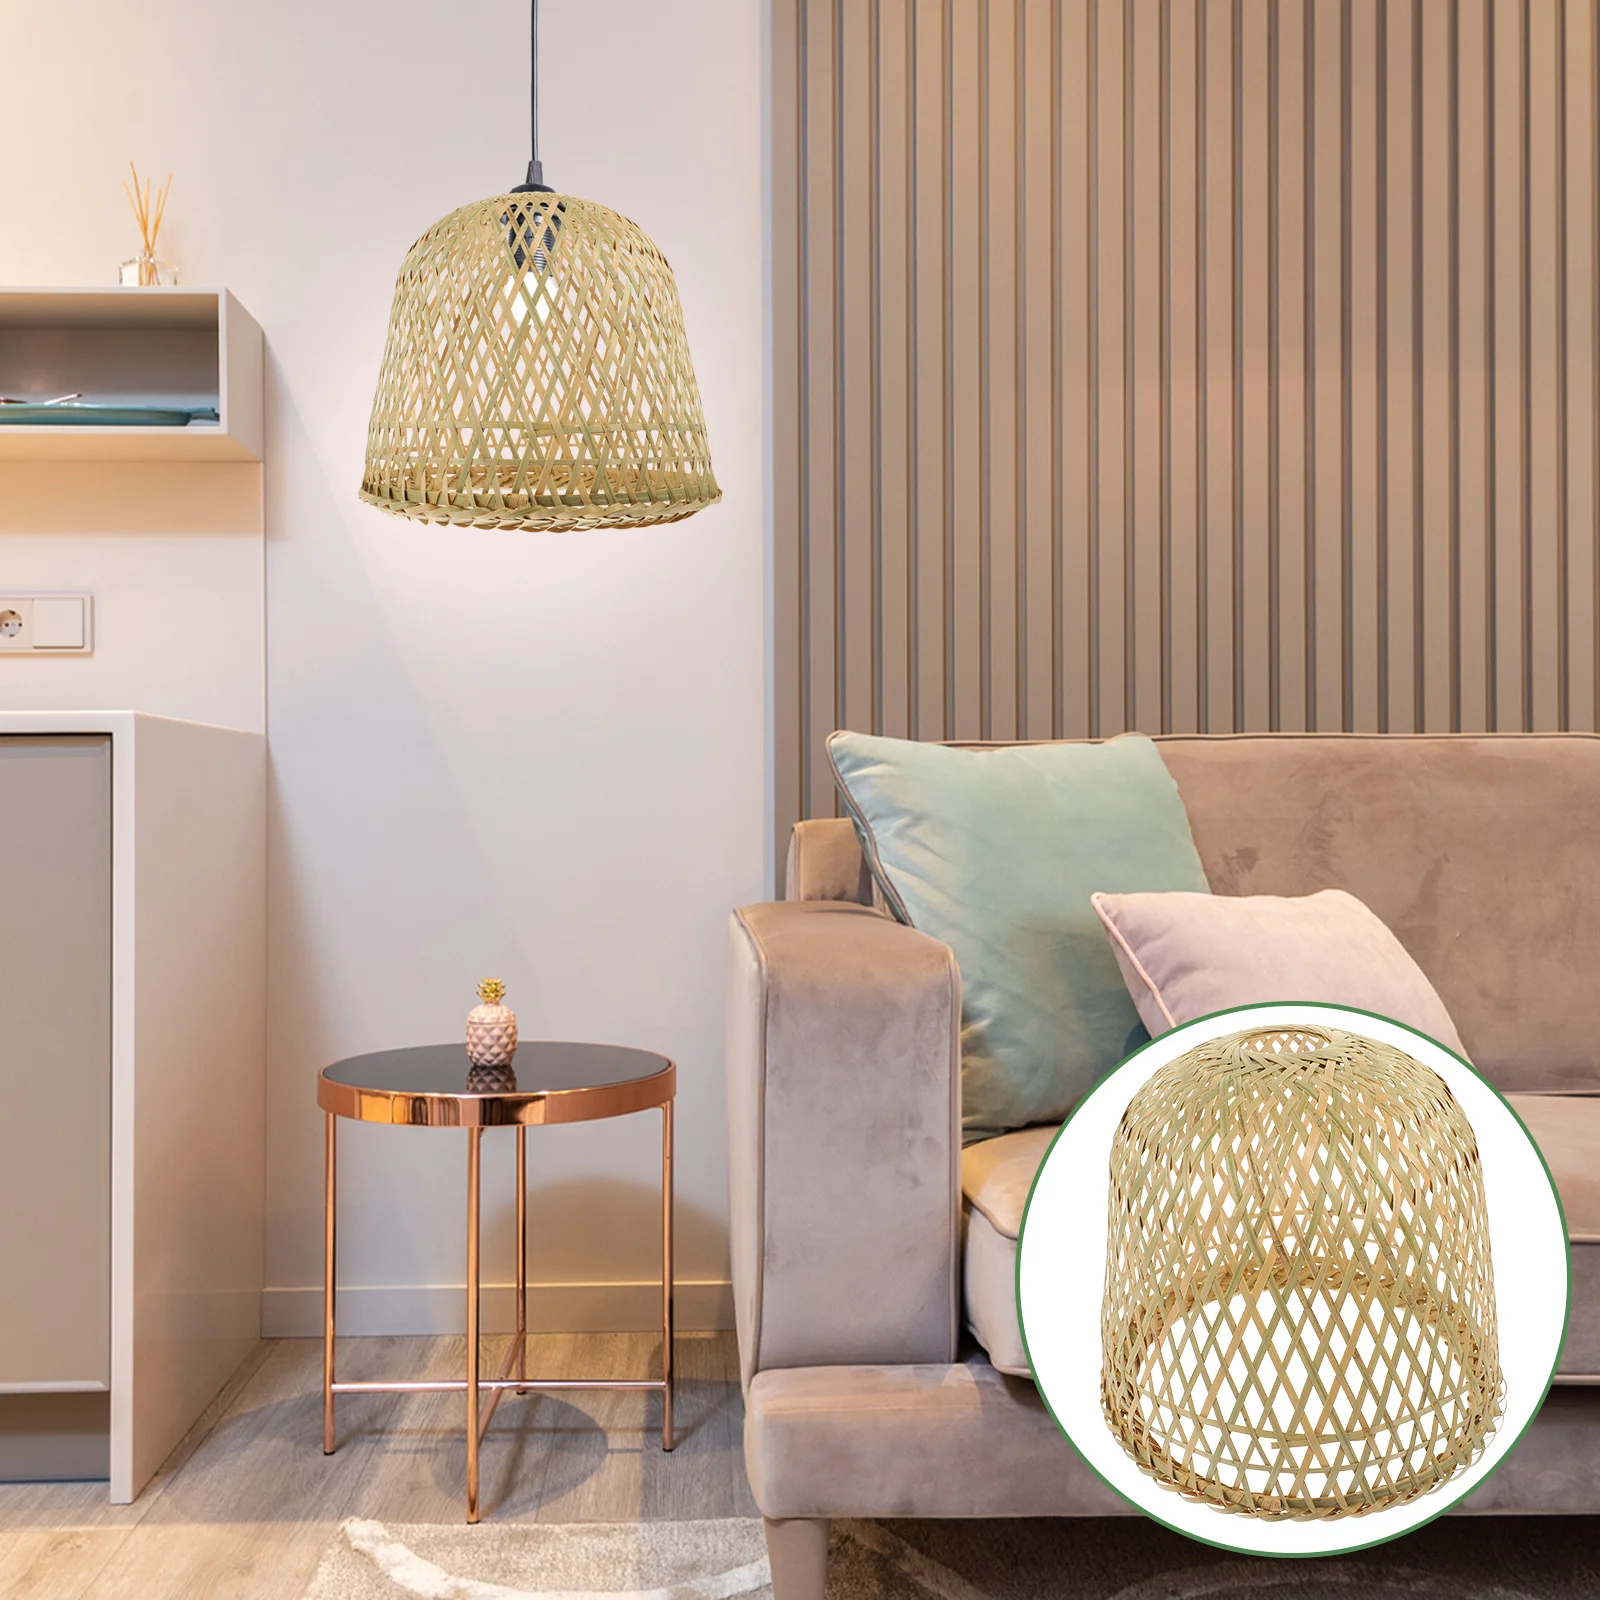 

Ceiling Light Shade Bedside Lampshade Interior Accessories Table Cover Rattan Pendant Menorah Bulbs Wicker Candelabra Shades